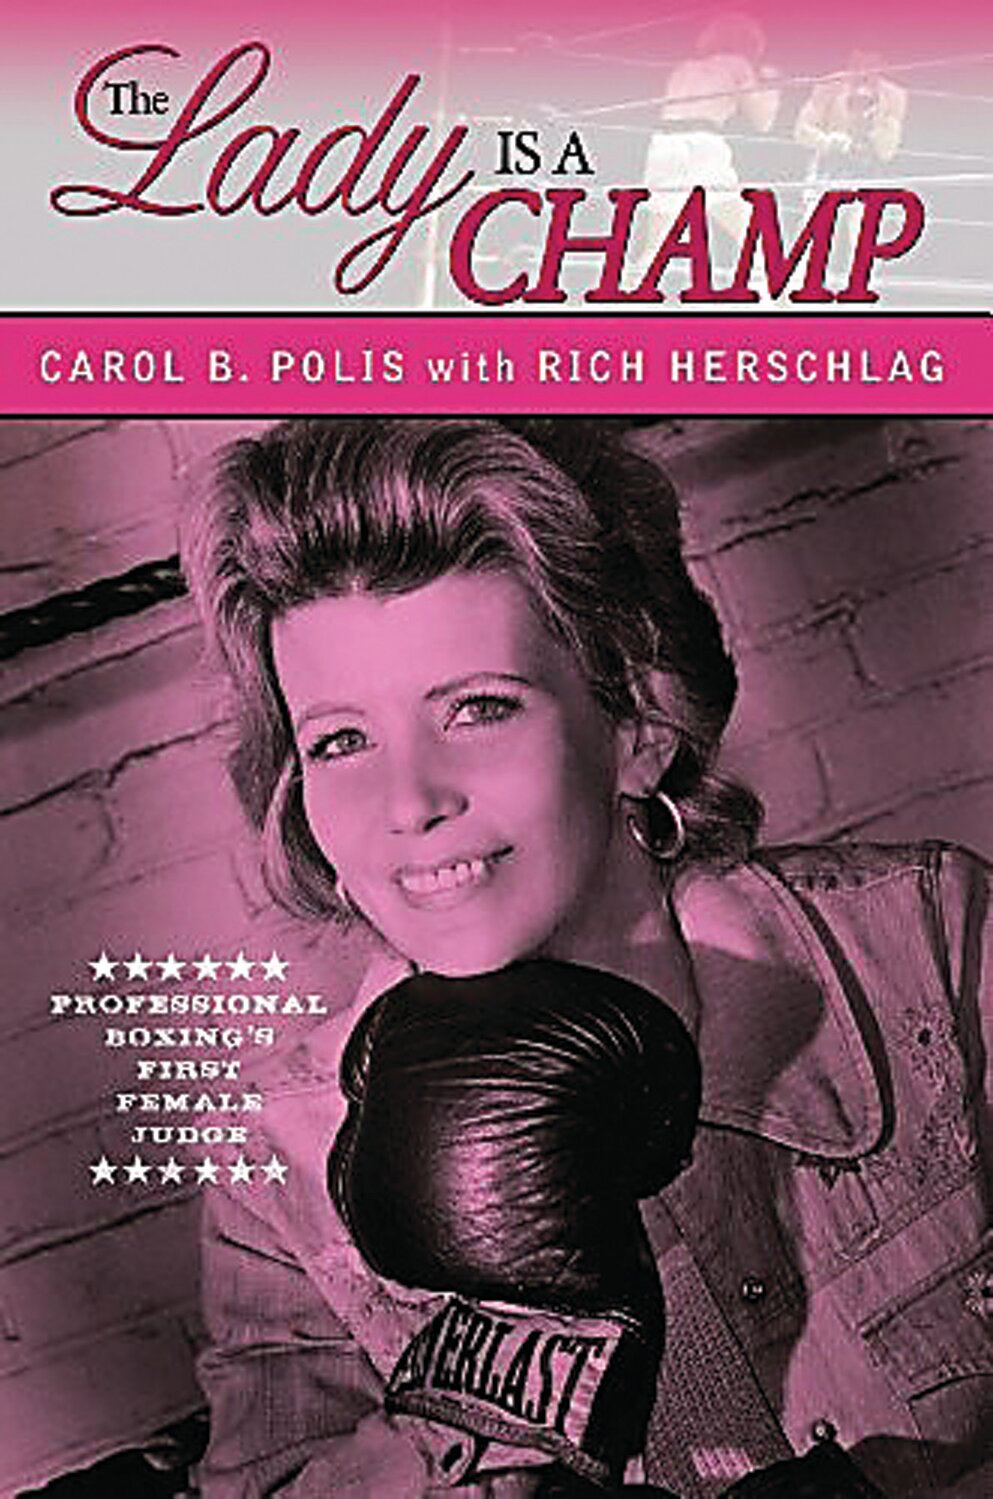 The cover of “The Lady is a Champ.”